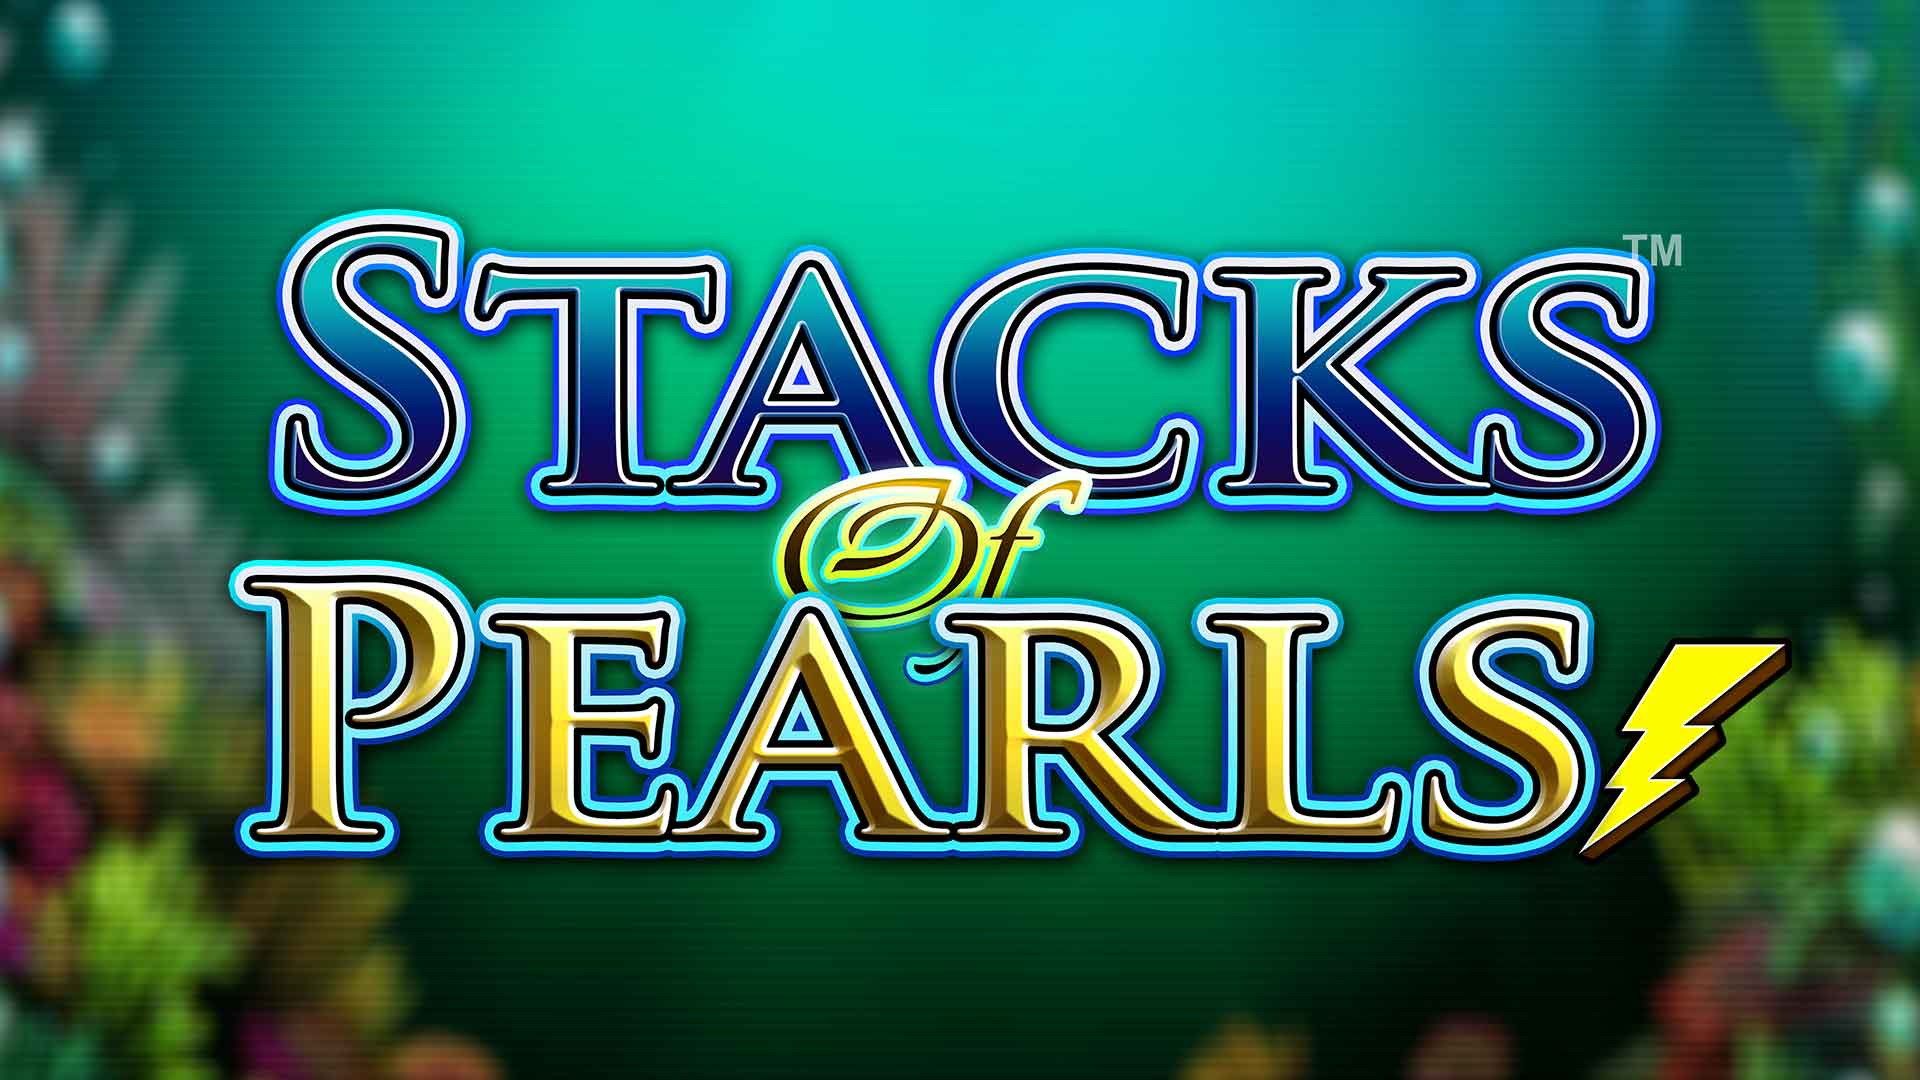 Stack of pearls